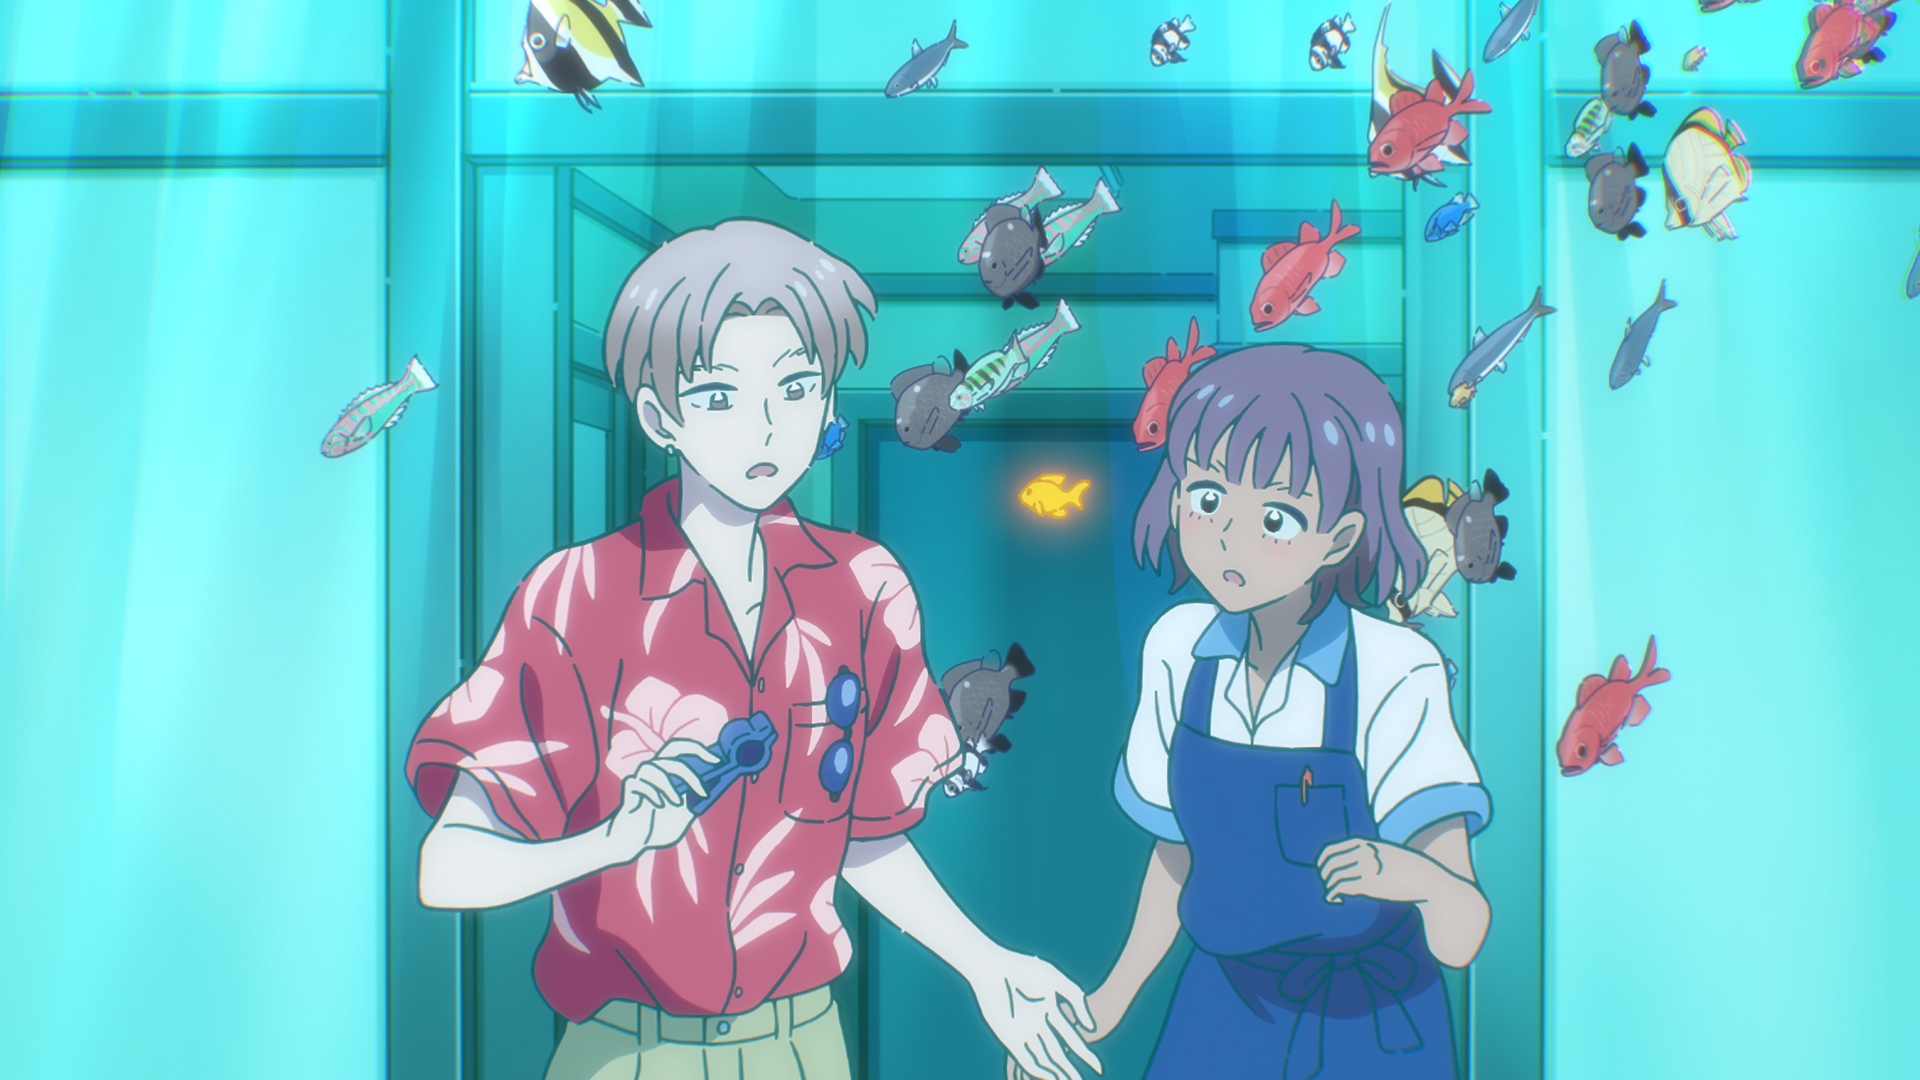 Ichiro Suzuki and Maise Higa are confounded by fish swimming in mid-air in the entryway of Maise's family hotel in a scene from the Deiji Meets Girl TV anime.